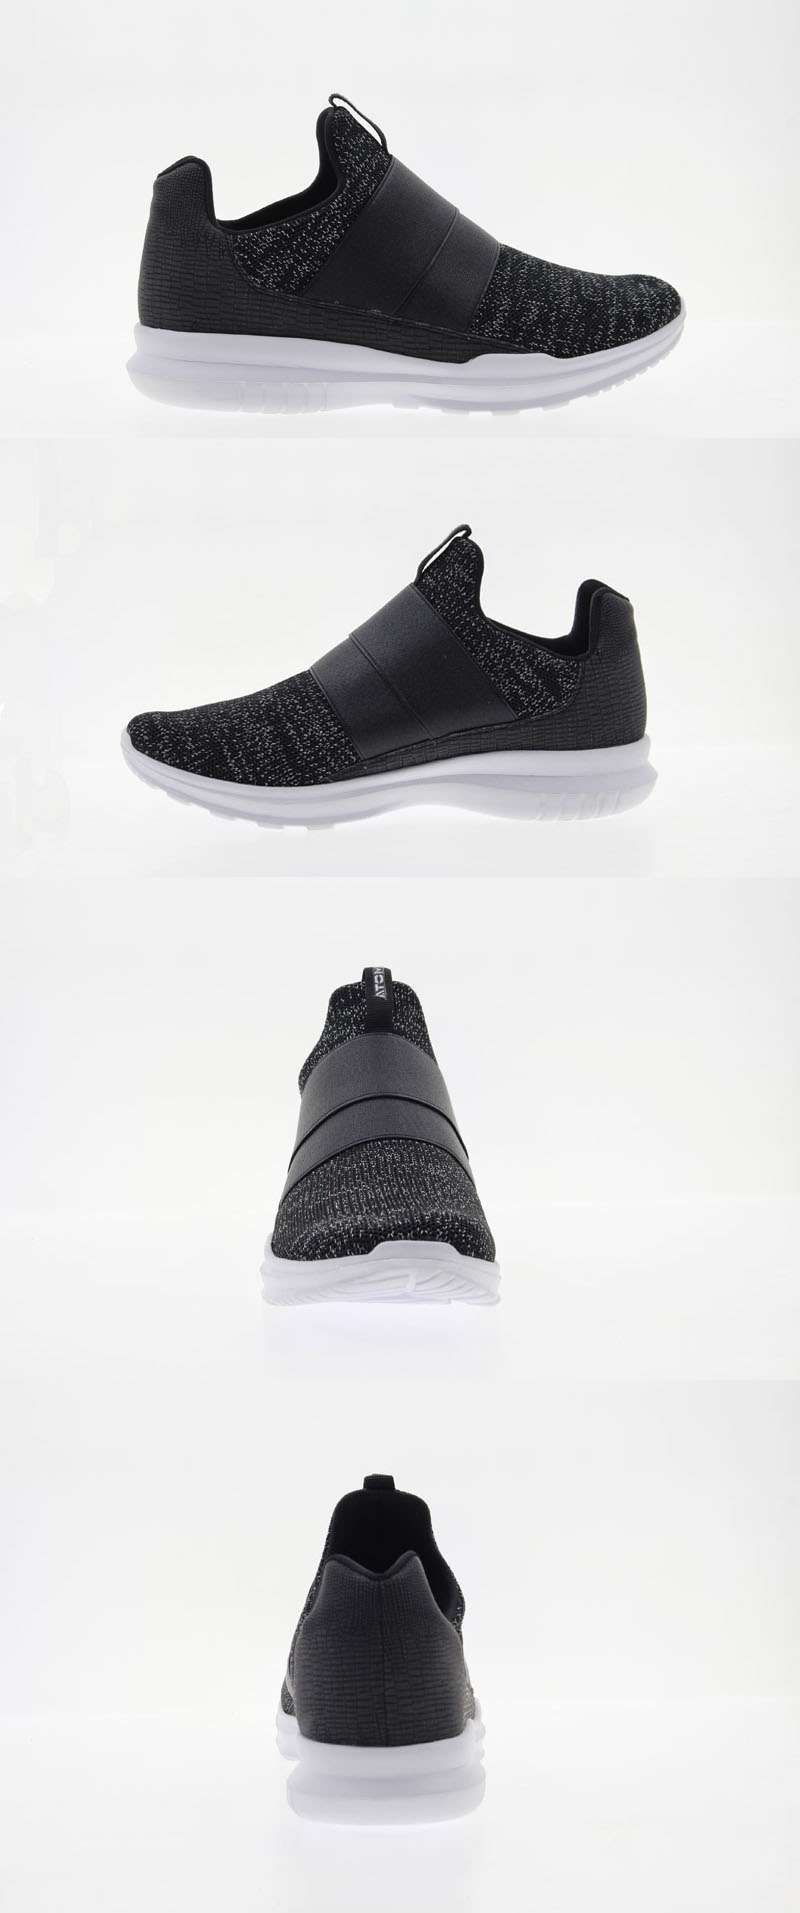 Classic black white color mixture sneakers